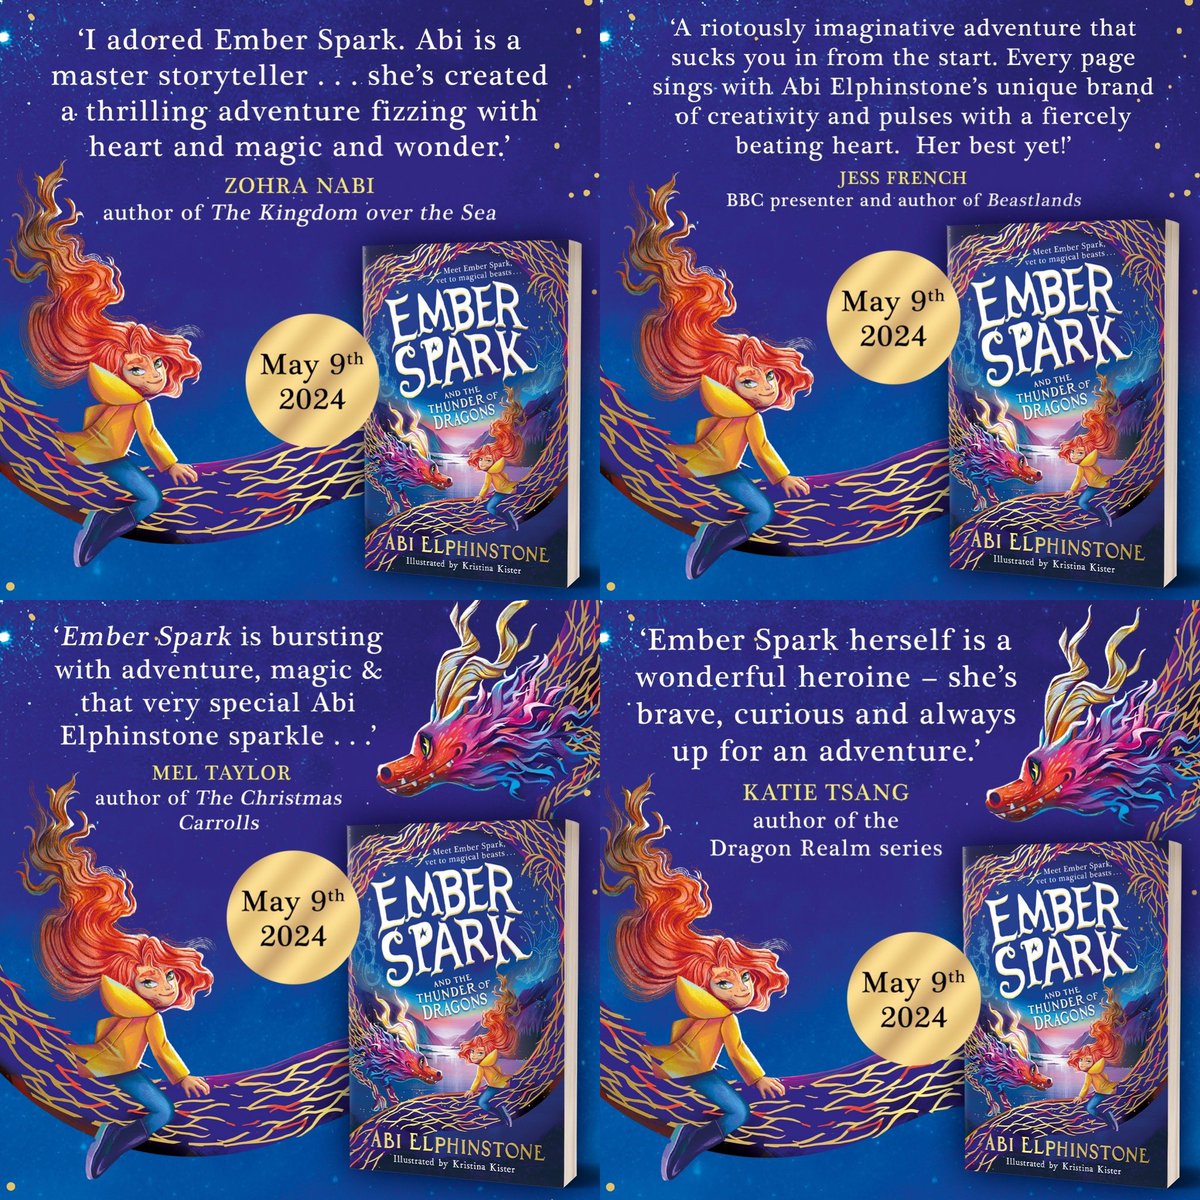 EMBER SPARK publishes this week! And I am so grateful to these fantastic authors for their very generous words about it: @Zohra3Nabi (The City Beyond The Stars), @Zoologist_Jess (Beastlands), @MelTBessent (Race To Imagination Island) & @kwebberwrites (Dragon Force) 🐉